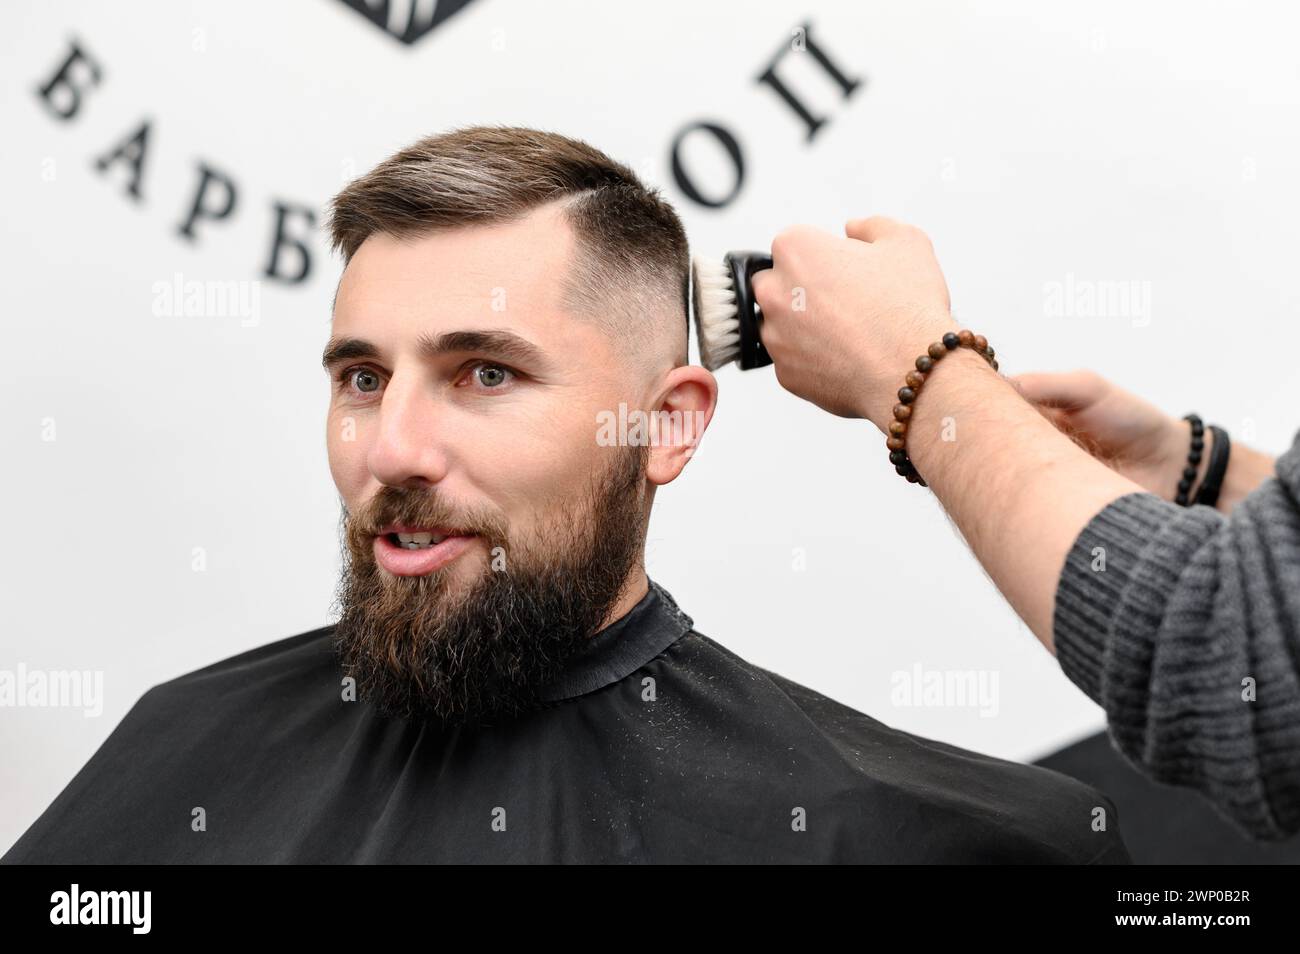 Barber sweeps hair with a brush while cutting a clients hair in a salon. Stock Photo